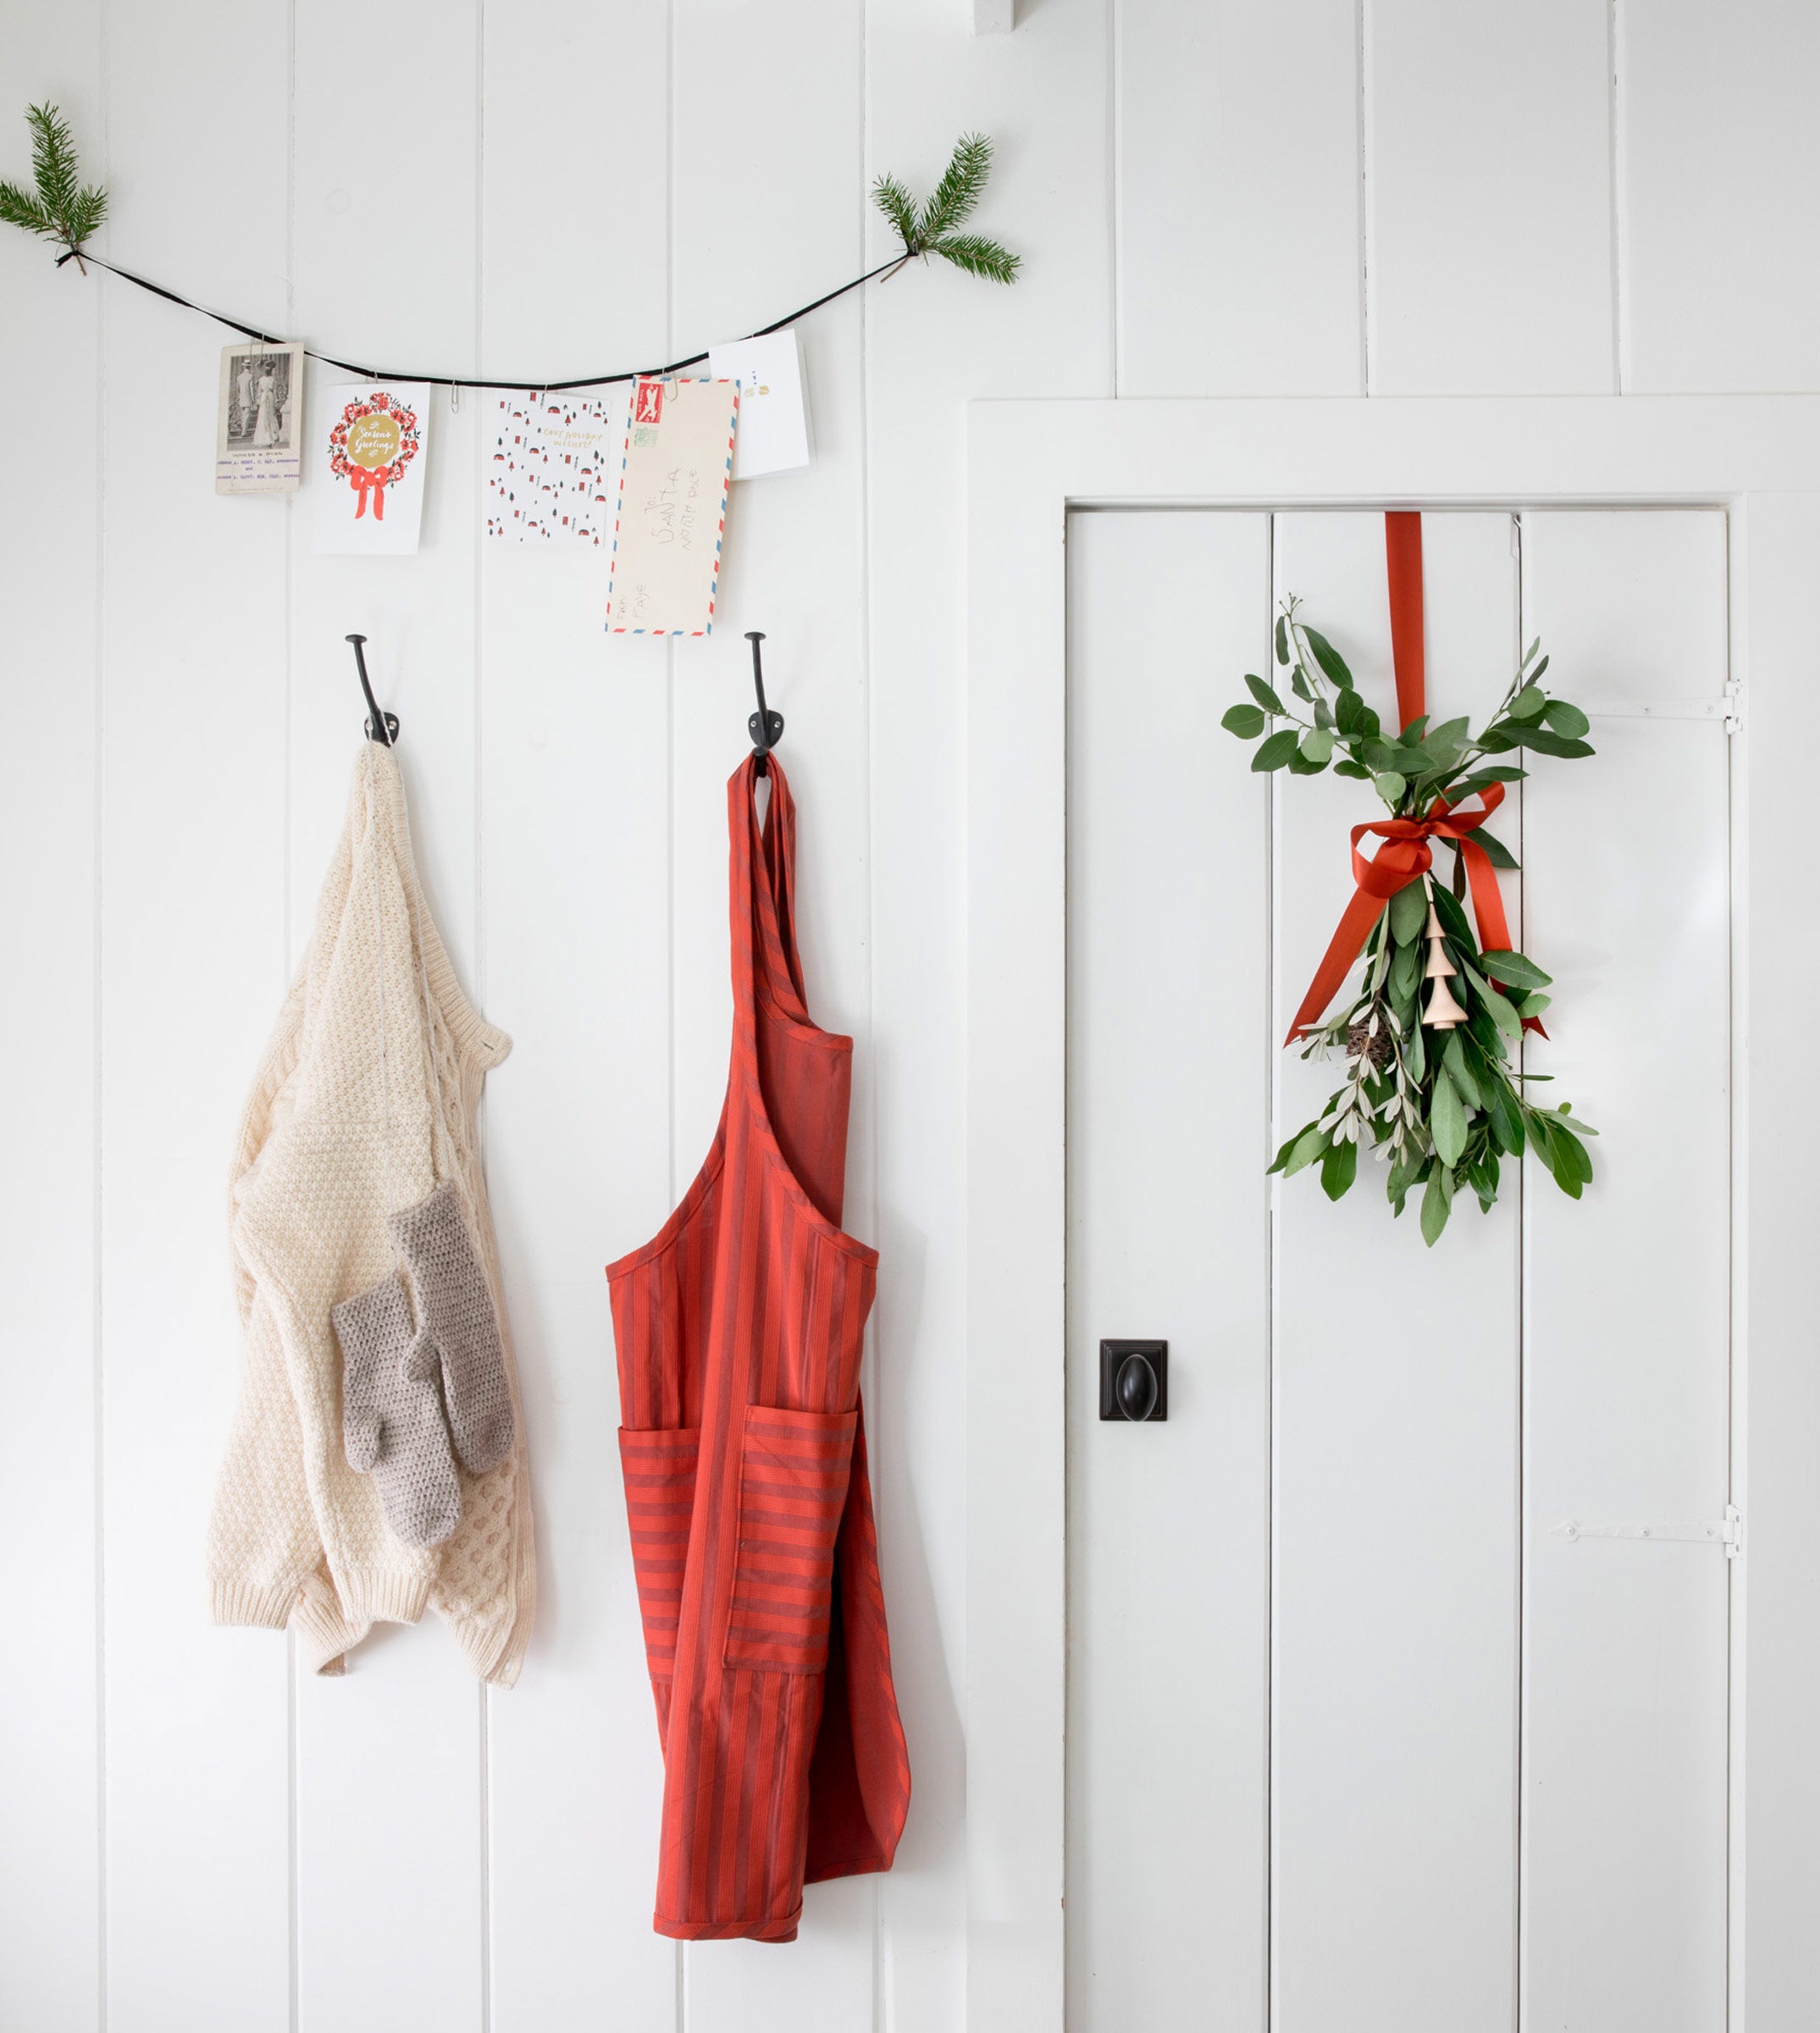 Entryway with holiday decor.